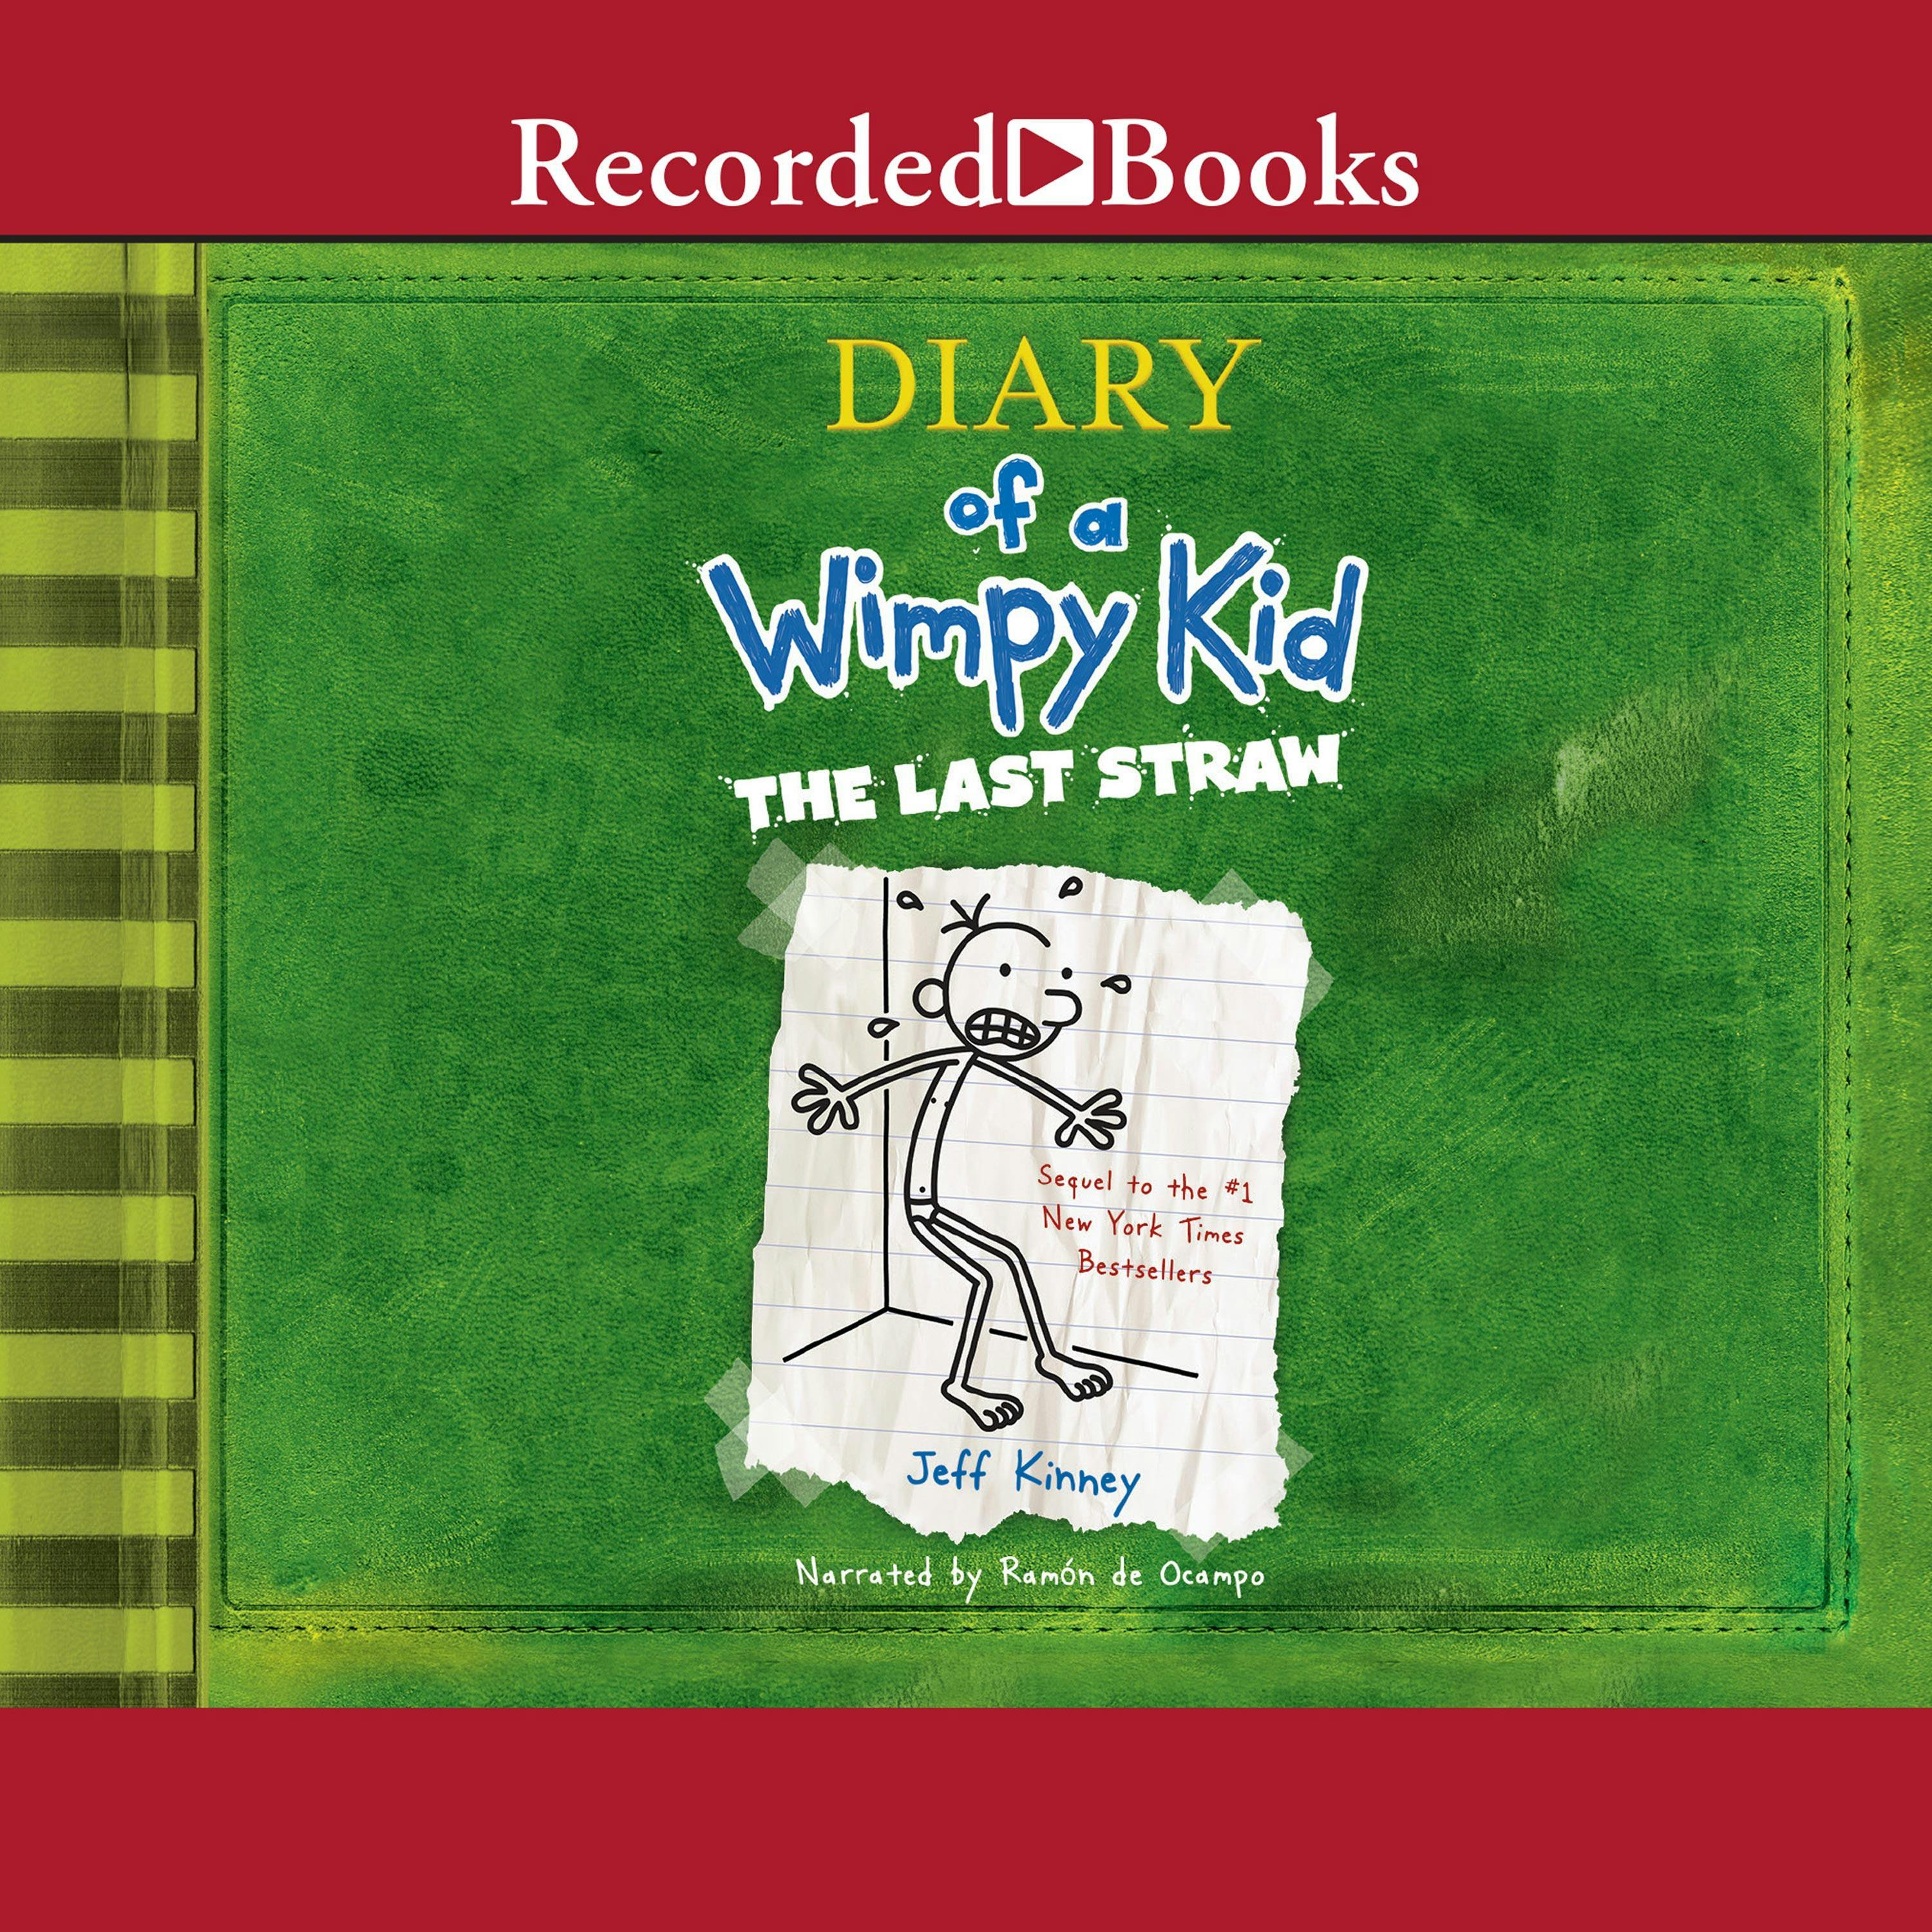 Diary of a Wimpy Kid: The Last Straw: Diary of a Wimpy Kid, Book 3 - Jeff Kinney